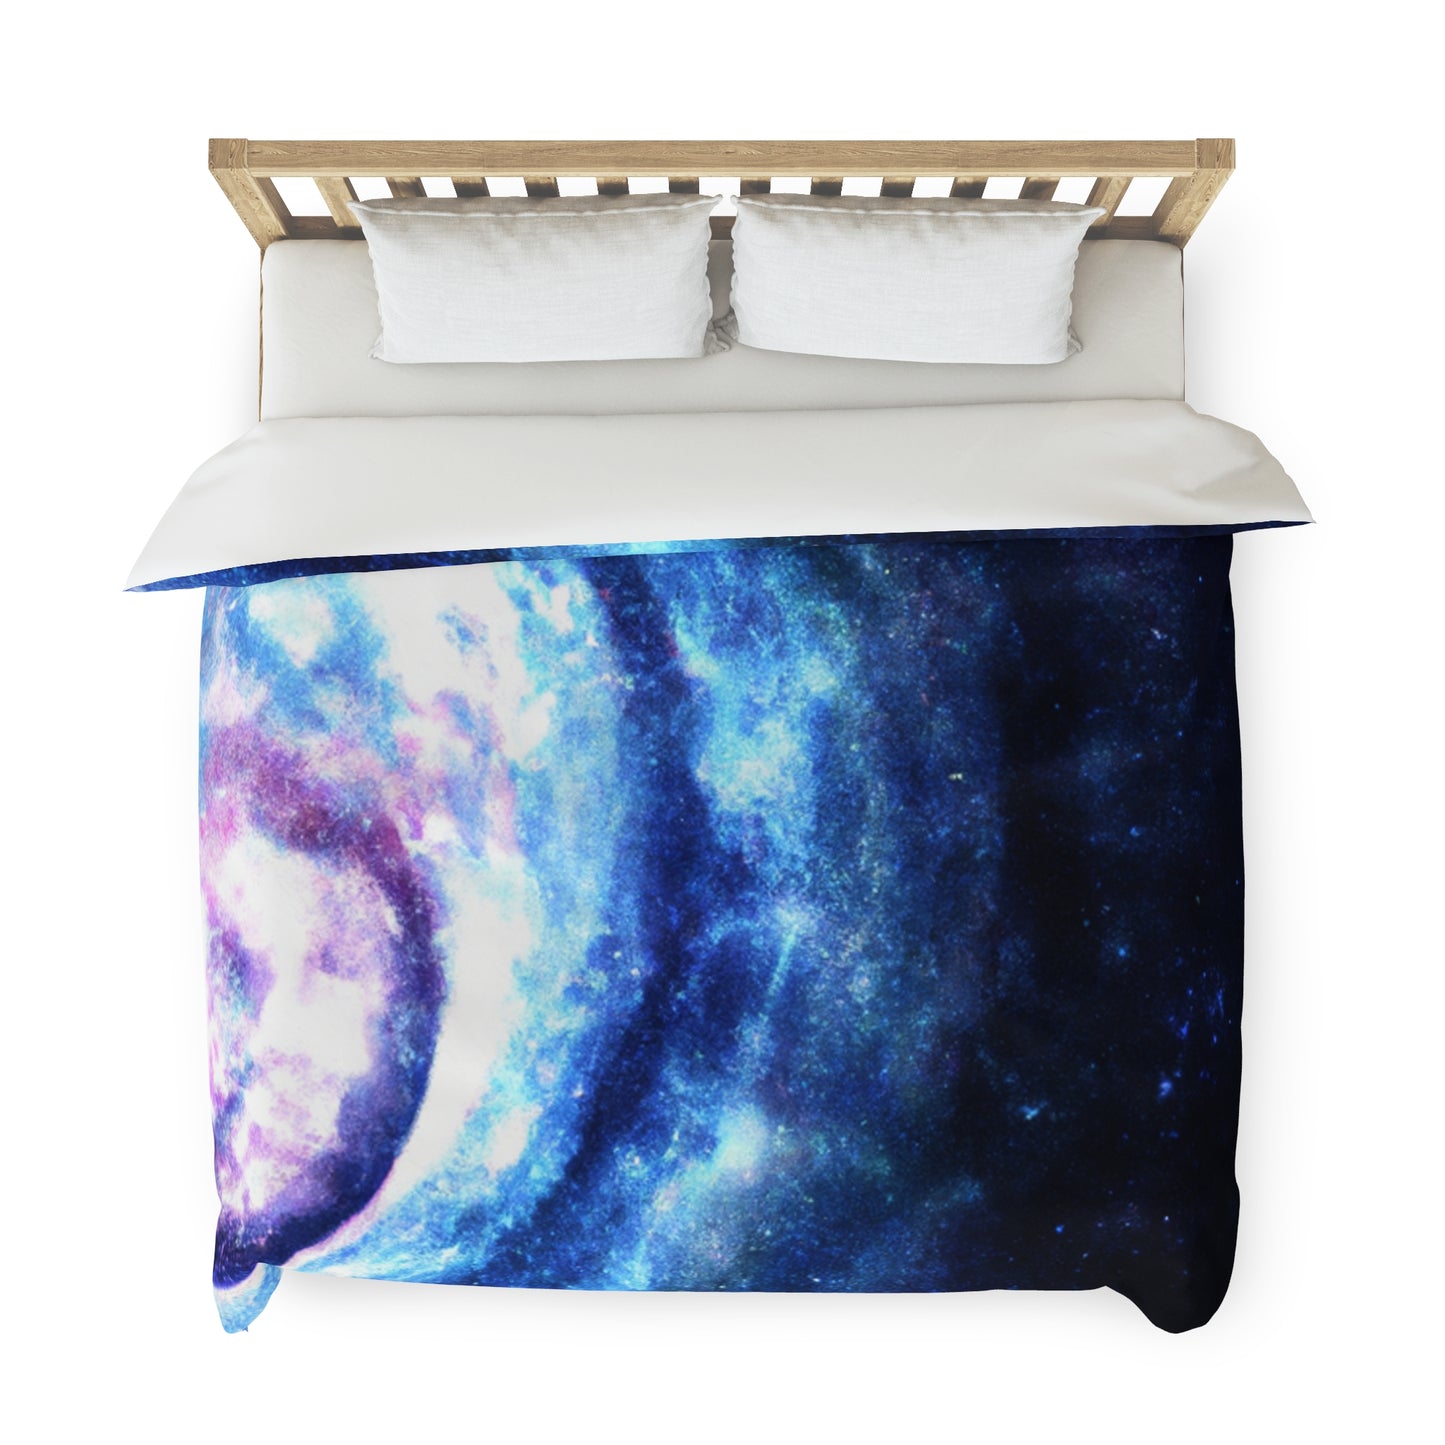 Dreamy Meadow - Astronomy Duvet Bed Cover